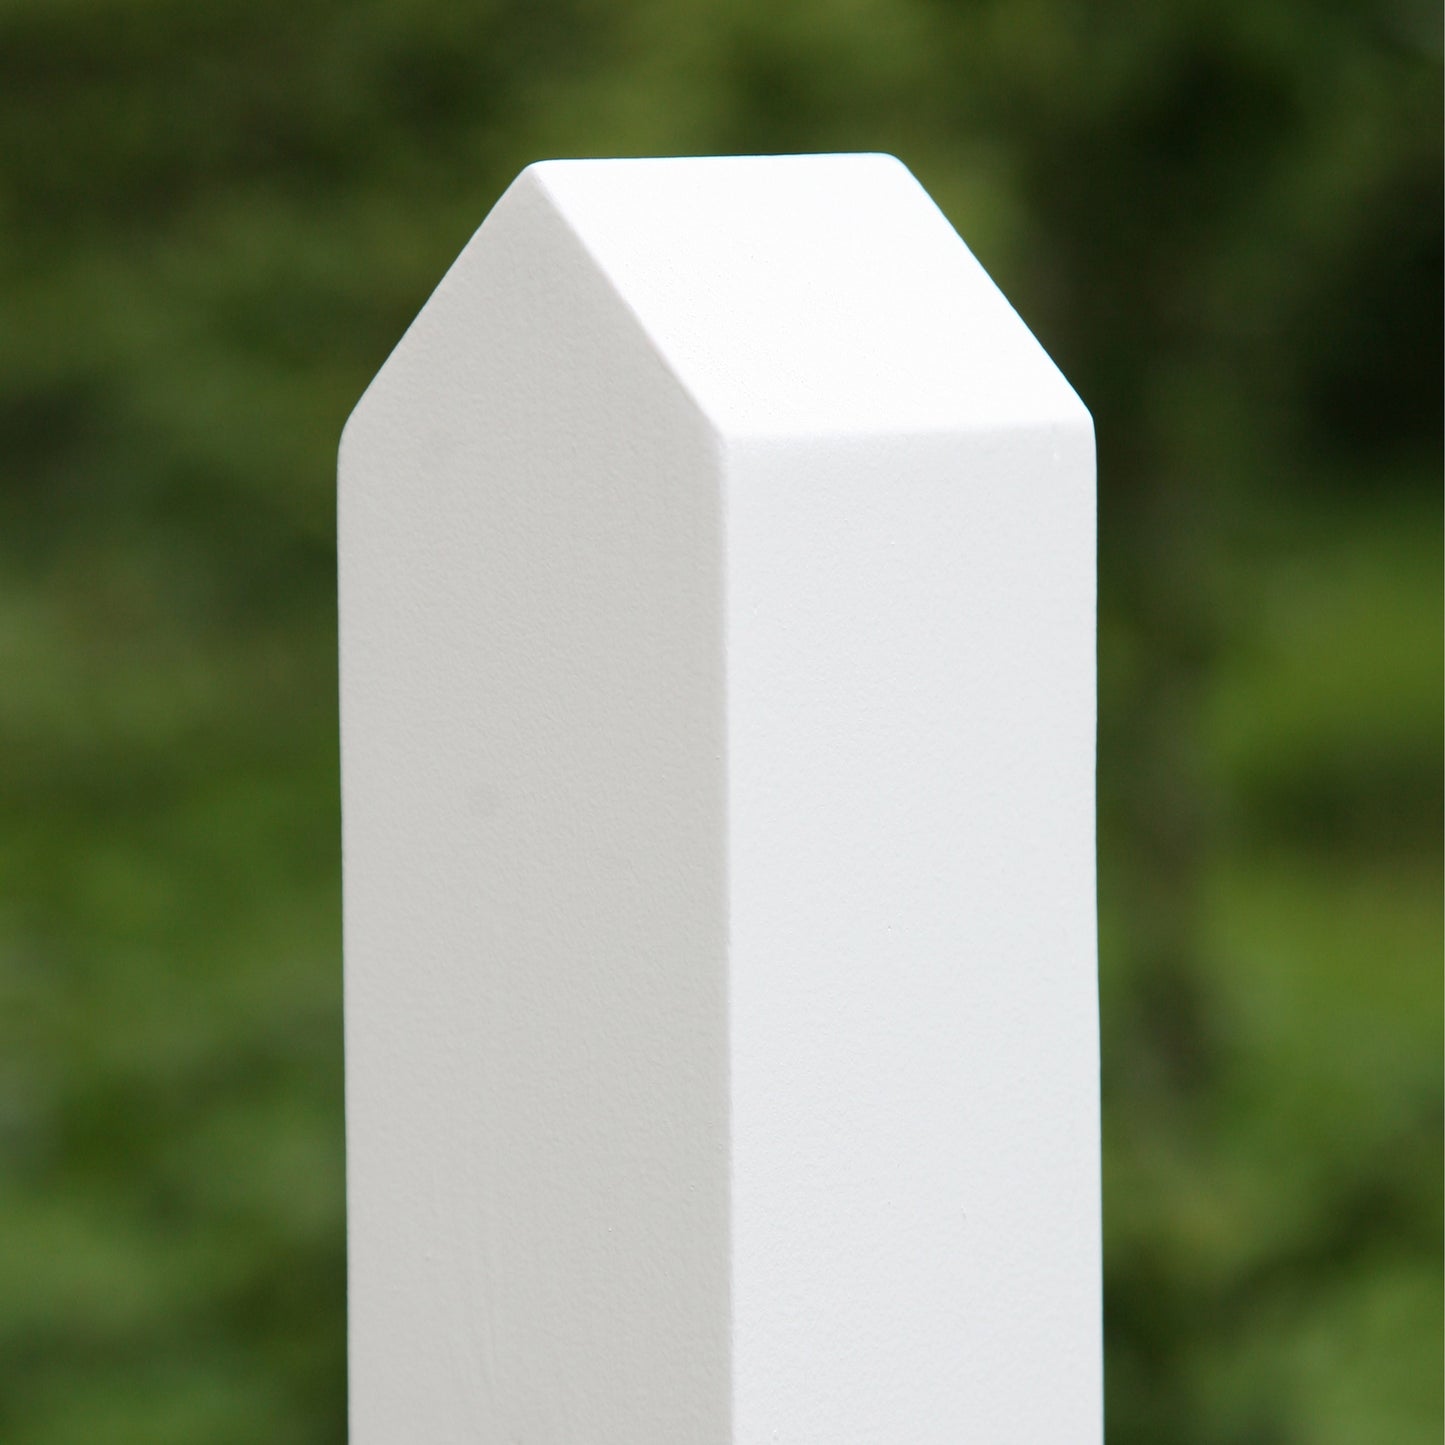 Fence Post 70 x 70mm Pointed Top Primed